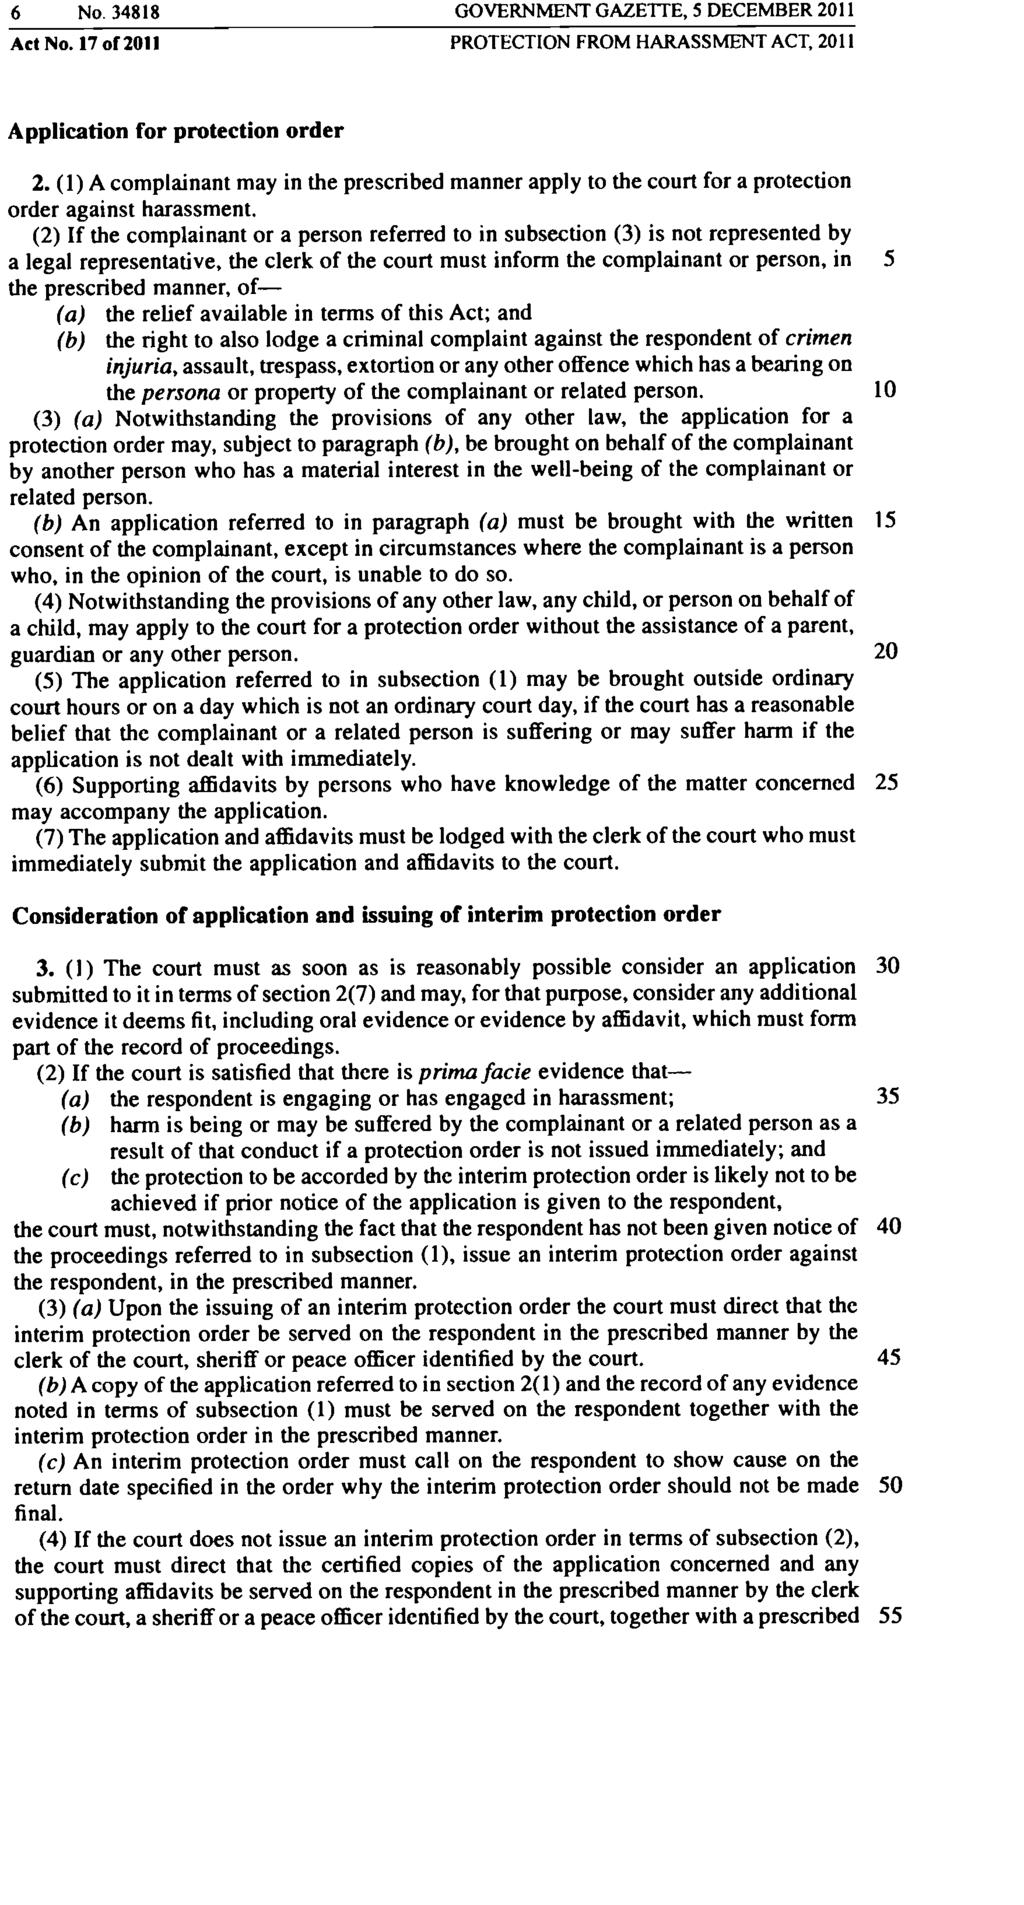 6 No,34818 GOVERNMENT GAZETTE, 5 DECEMBER 2011 Ad No. 17 0(2011 PROTECTION FROM HARASSMENT ACT, 2011 Application for protection order 2.